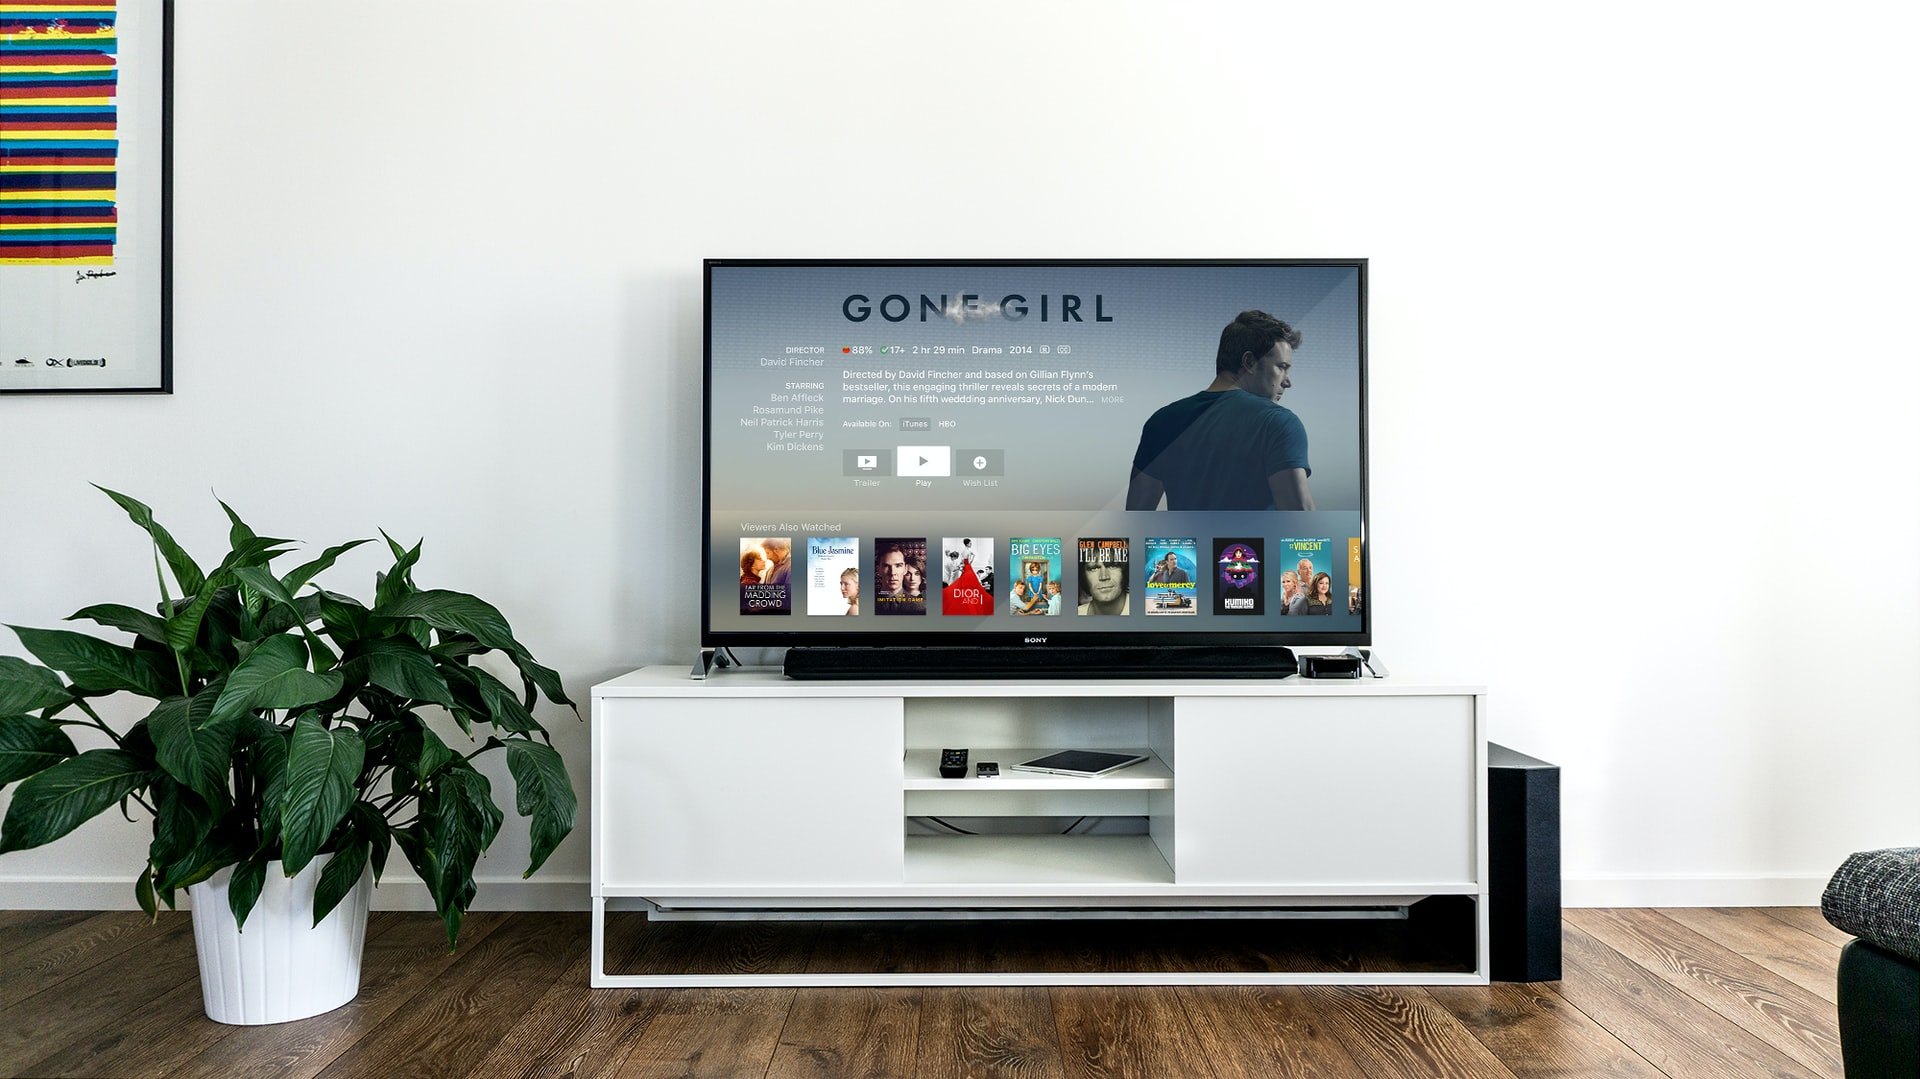 How to Download Apps on Samsung Smart TV